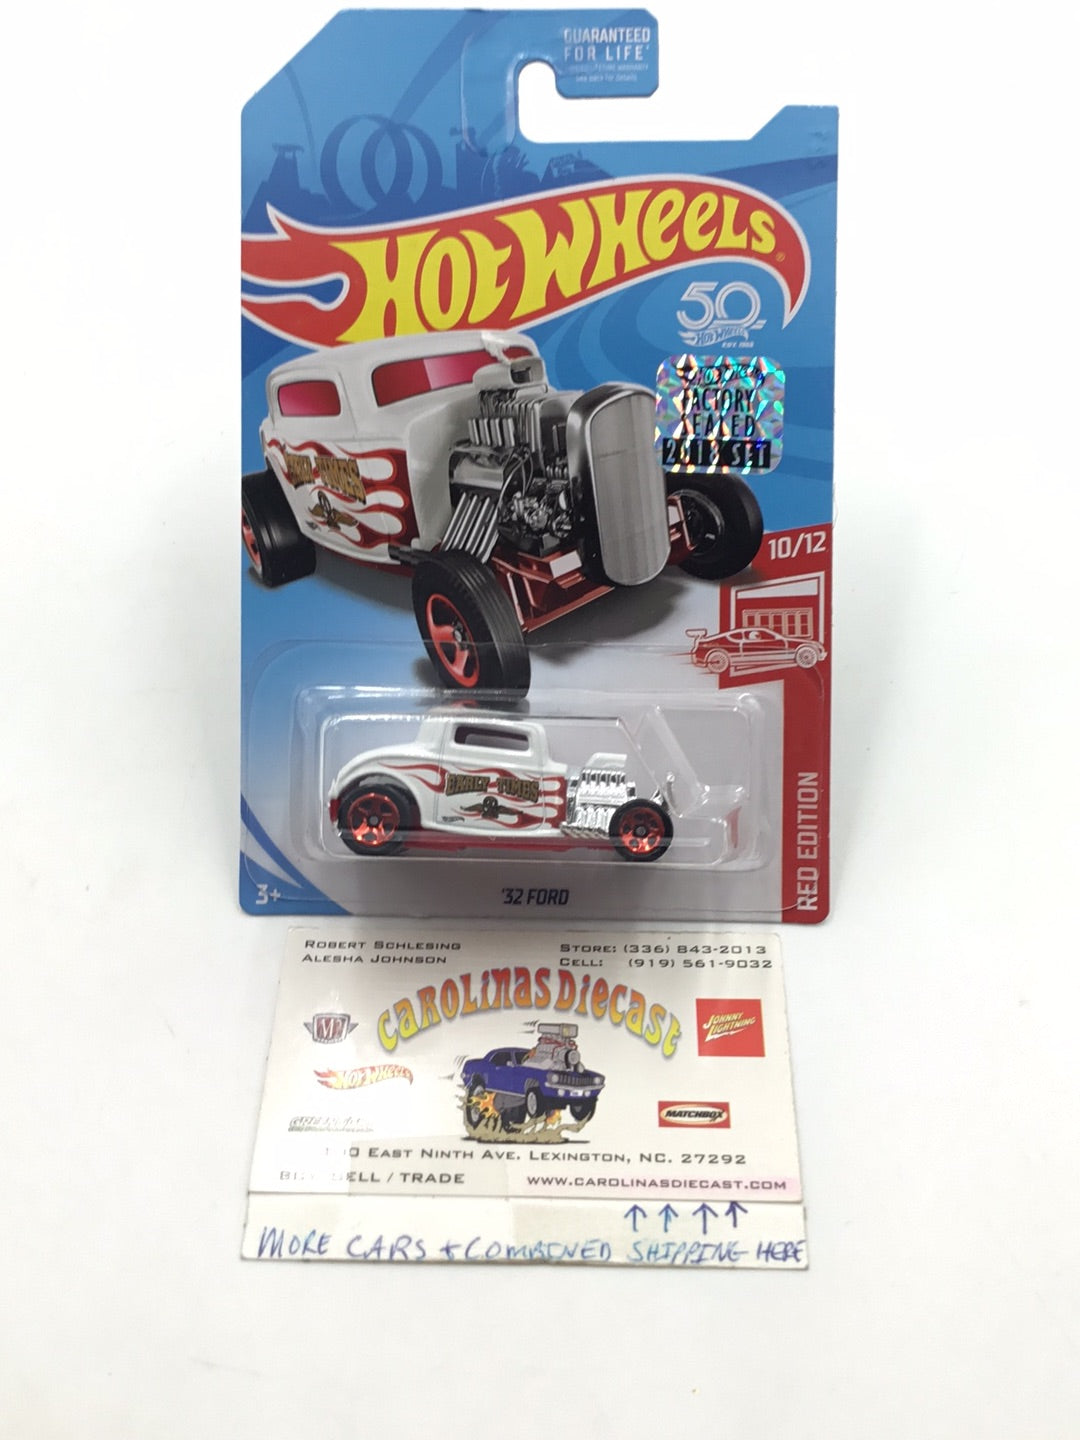 2018 hot wheels red edition #10 32 Ford target red factory sealed sticker